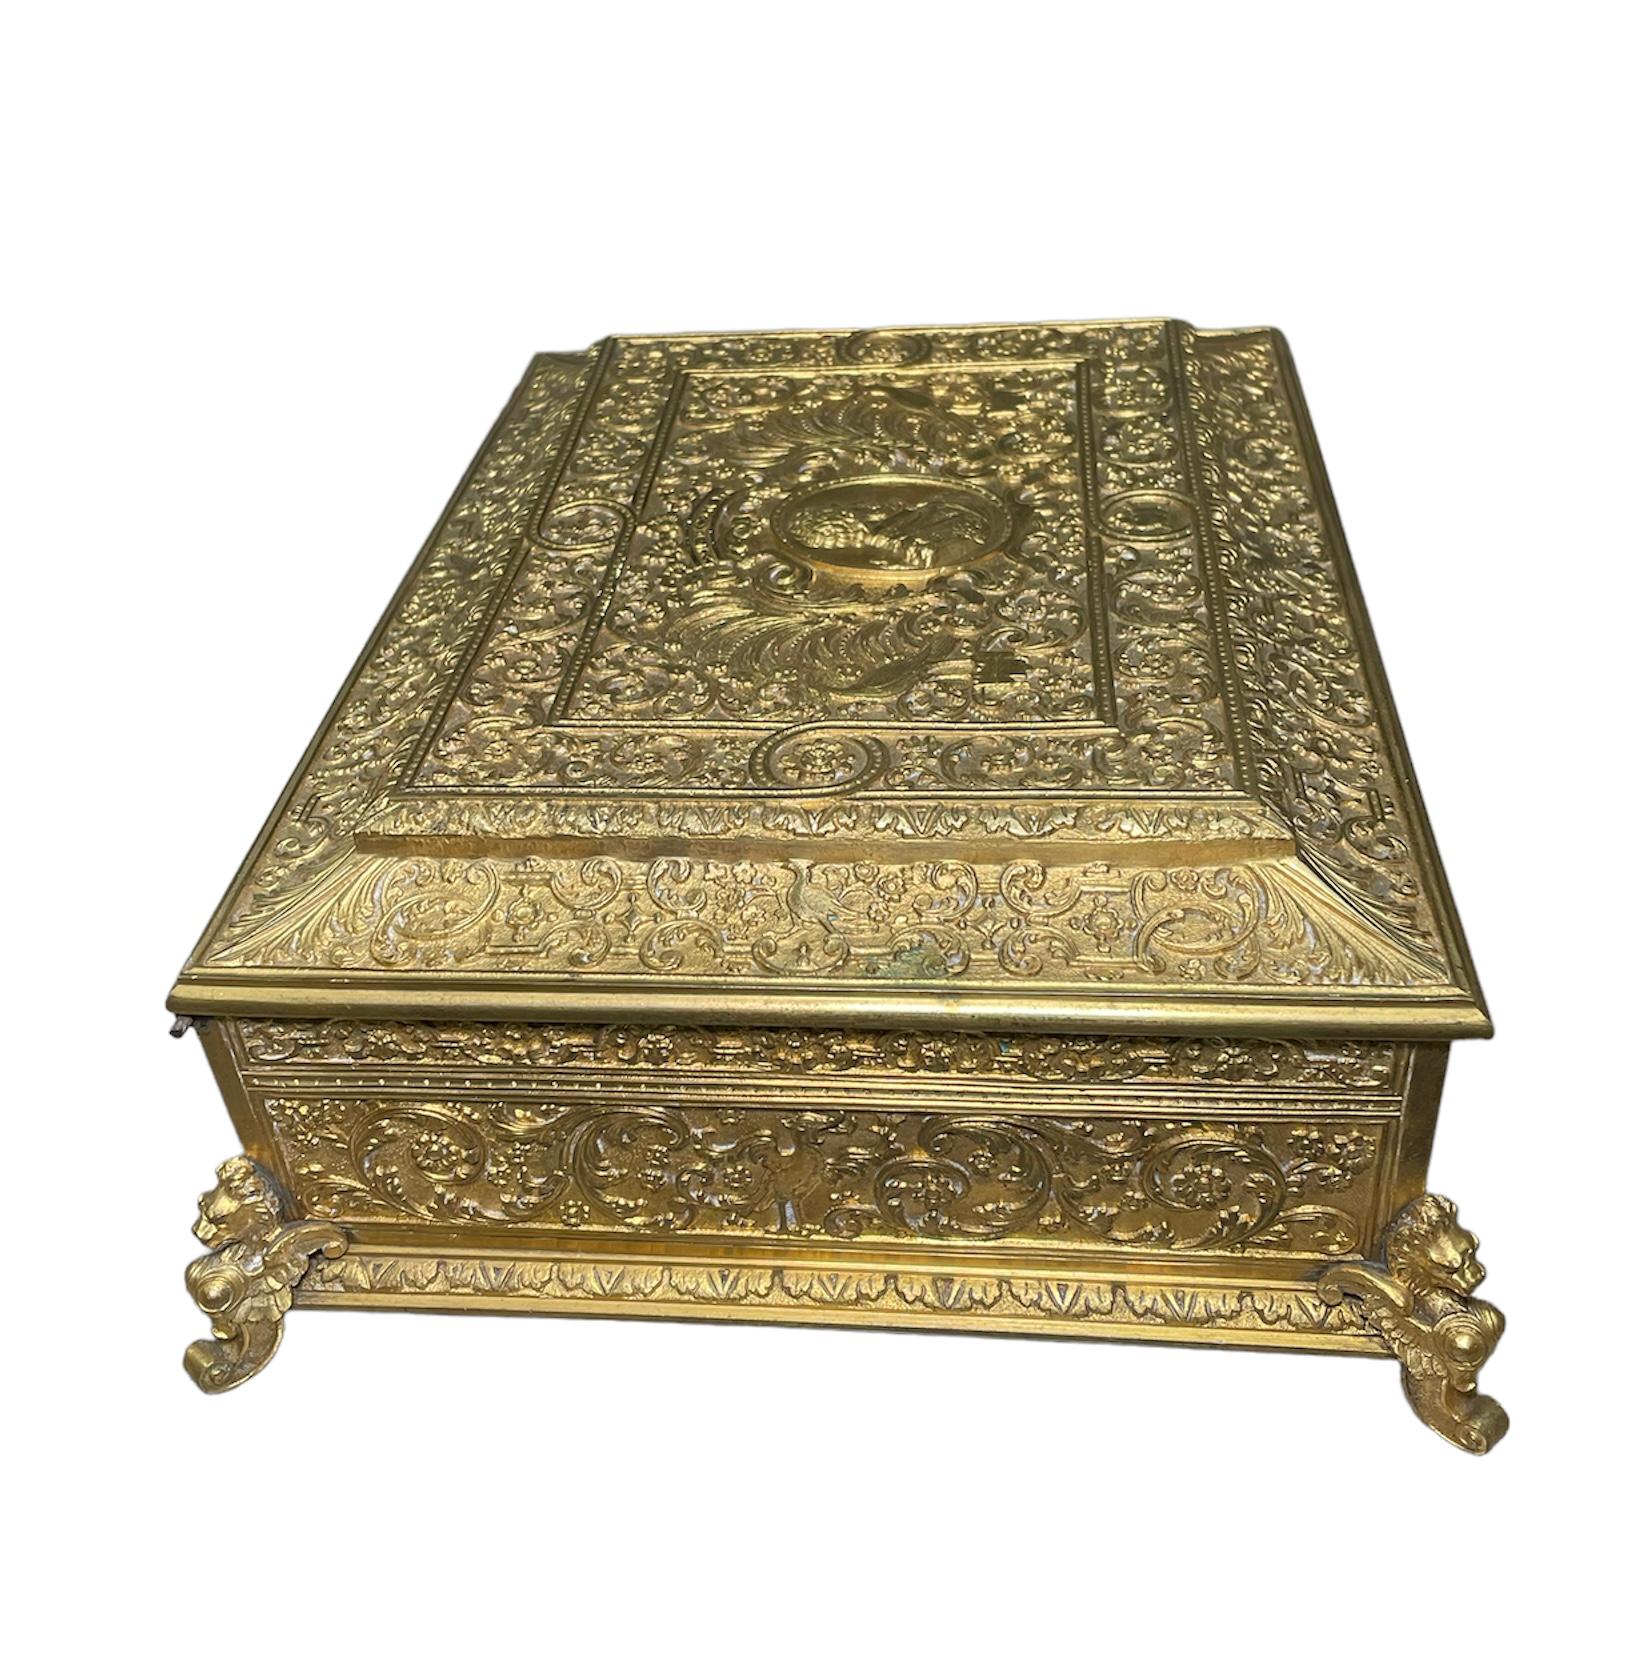 Renaissance Style Gilt Rectangular Casket , Jewelry, Desk and /or Decorative Box In Good Condition For Sale In Guaynabo, PR